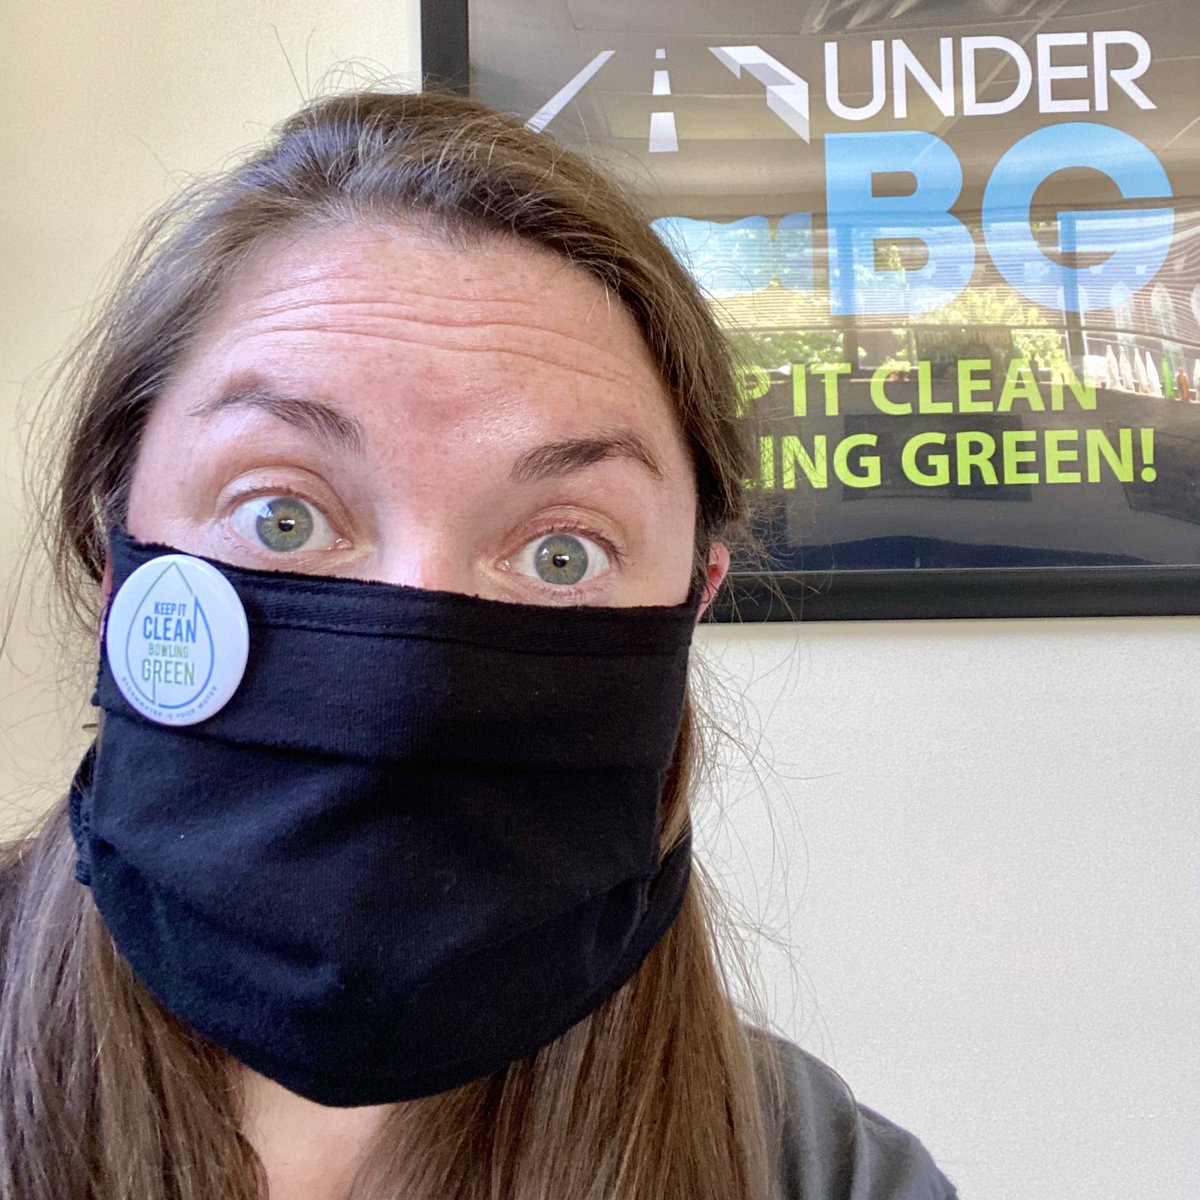 #whyiwearmymask when I do need to be at the office or on-site, I want to protect my “work family”! The shameless plug front and center and the fact it keeps my hair out of my face are just bonuses!  #keepitcleanbg with a whole new meaning.  @CityofBGKY